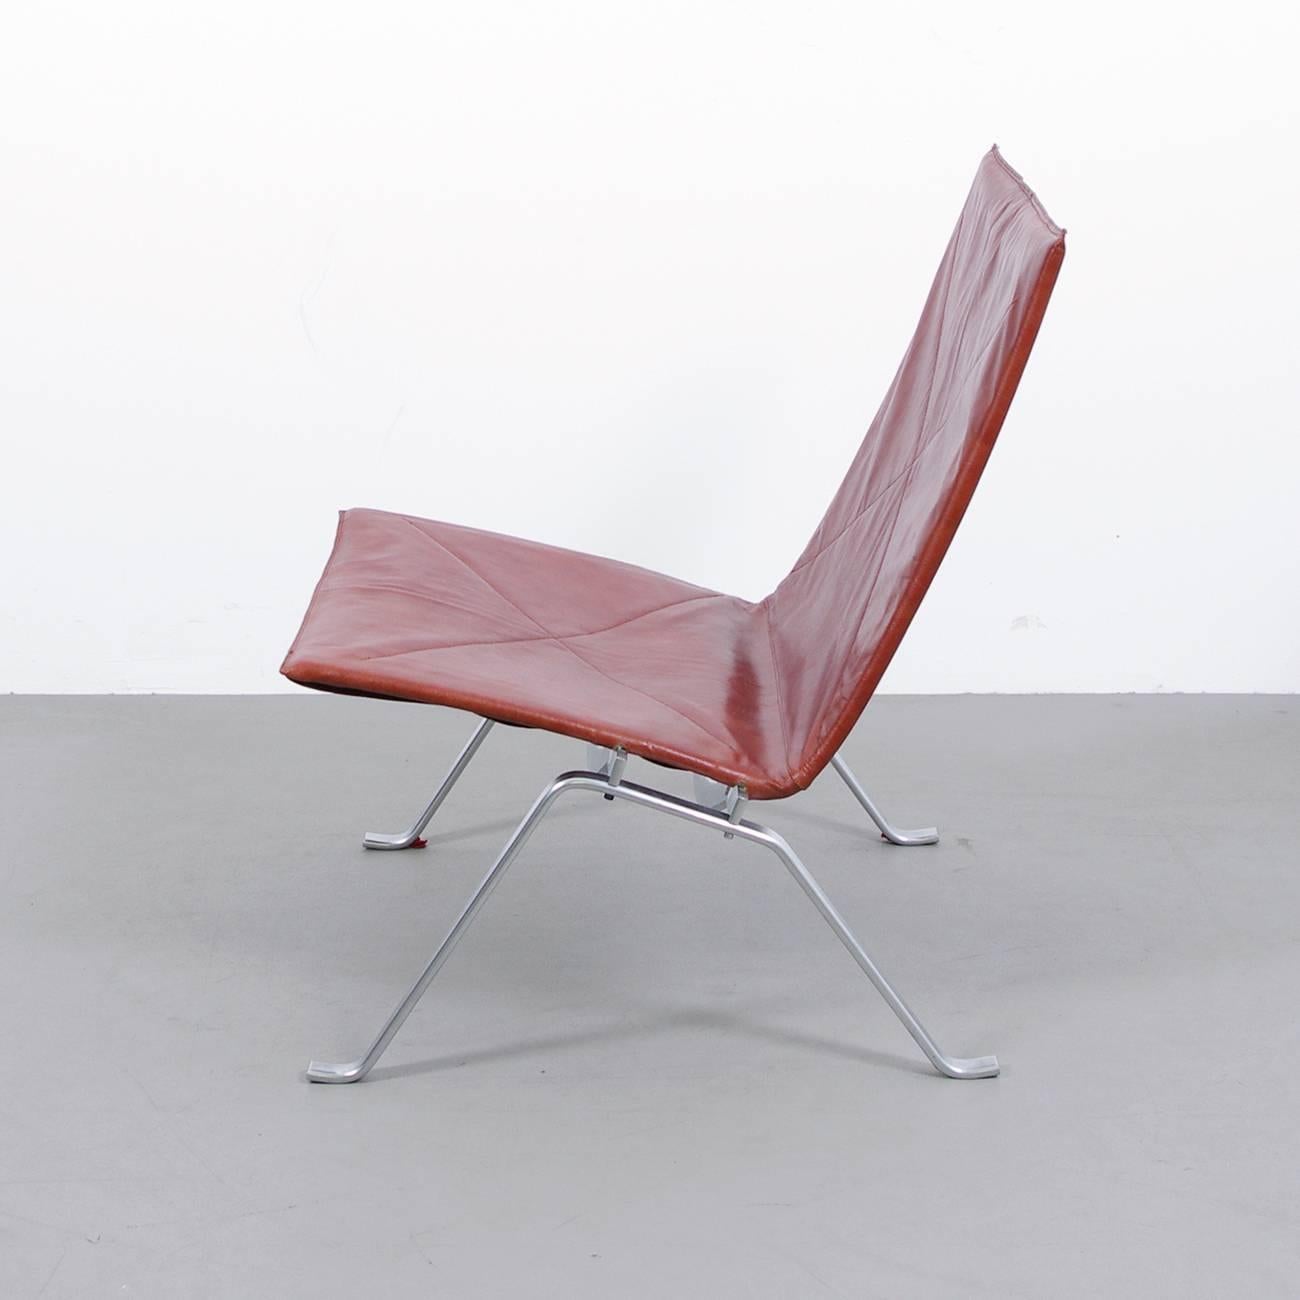 Nice example of the iconic PK22 easy chair. E Kold Christensen edition with red light patinated leather. Very good condition. Signed with impressed manufacturer's mark.